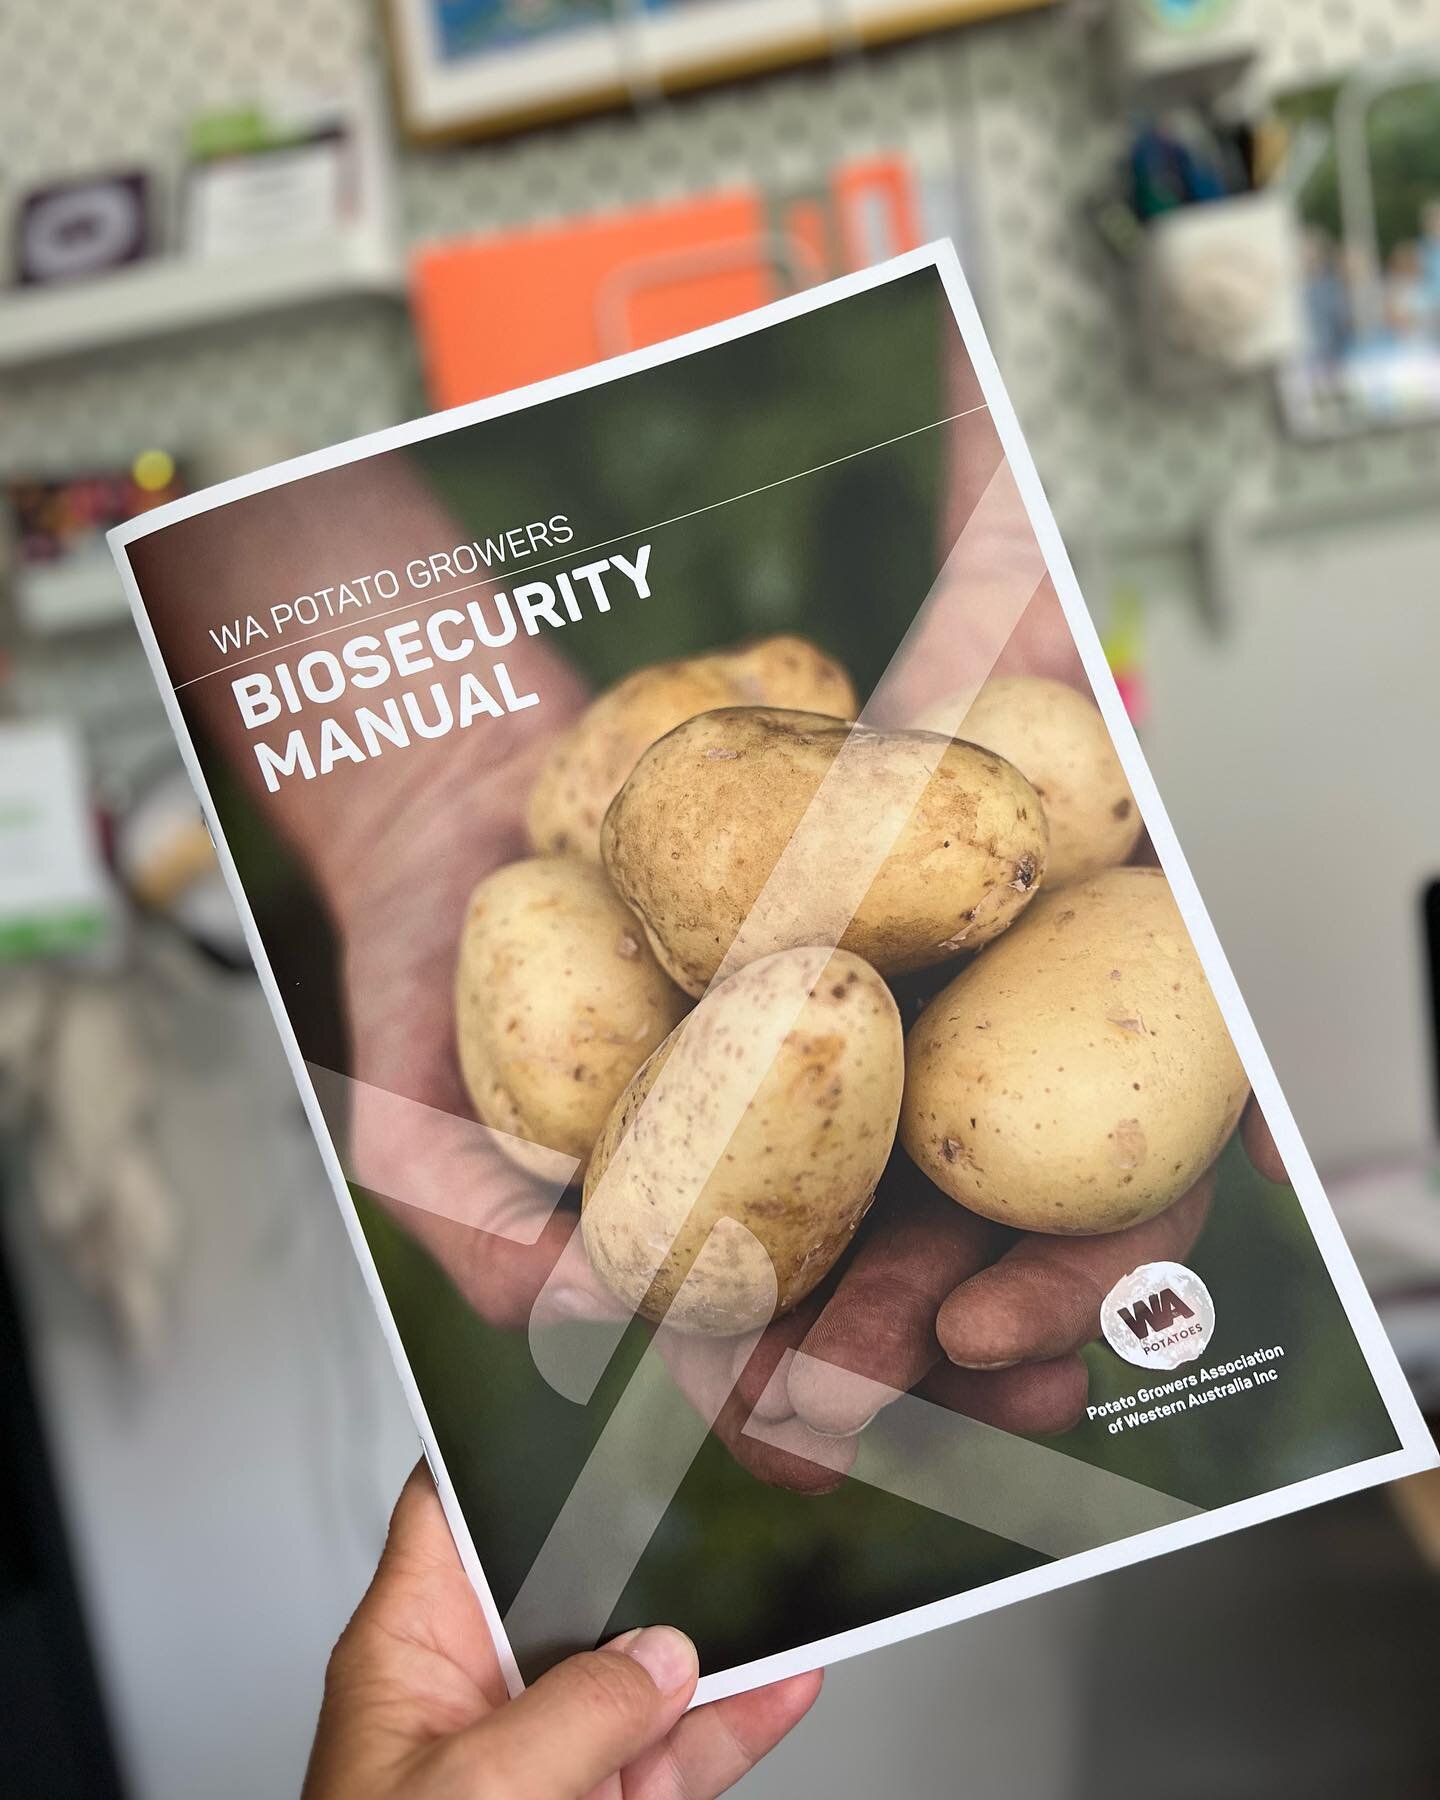 Very pleased to have this one printed and posted for the potato industry! Heading down tomorrow to catch up with growers and chat more about biosecurity #WAPotatoes #TheGoodCarb